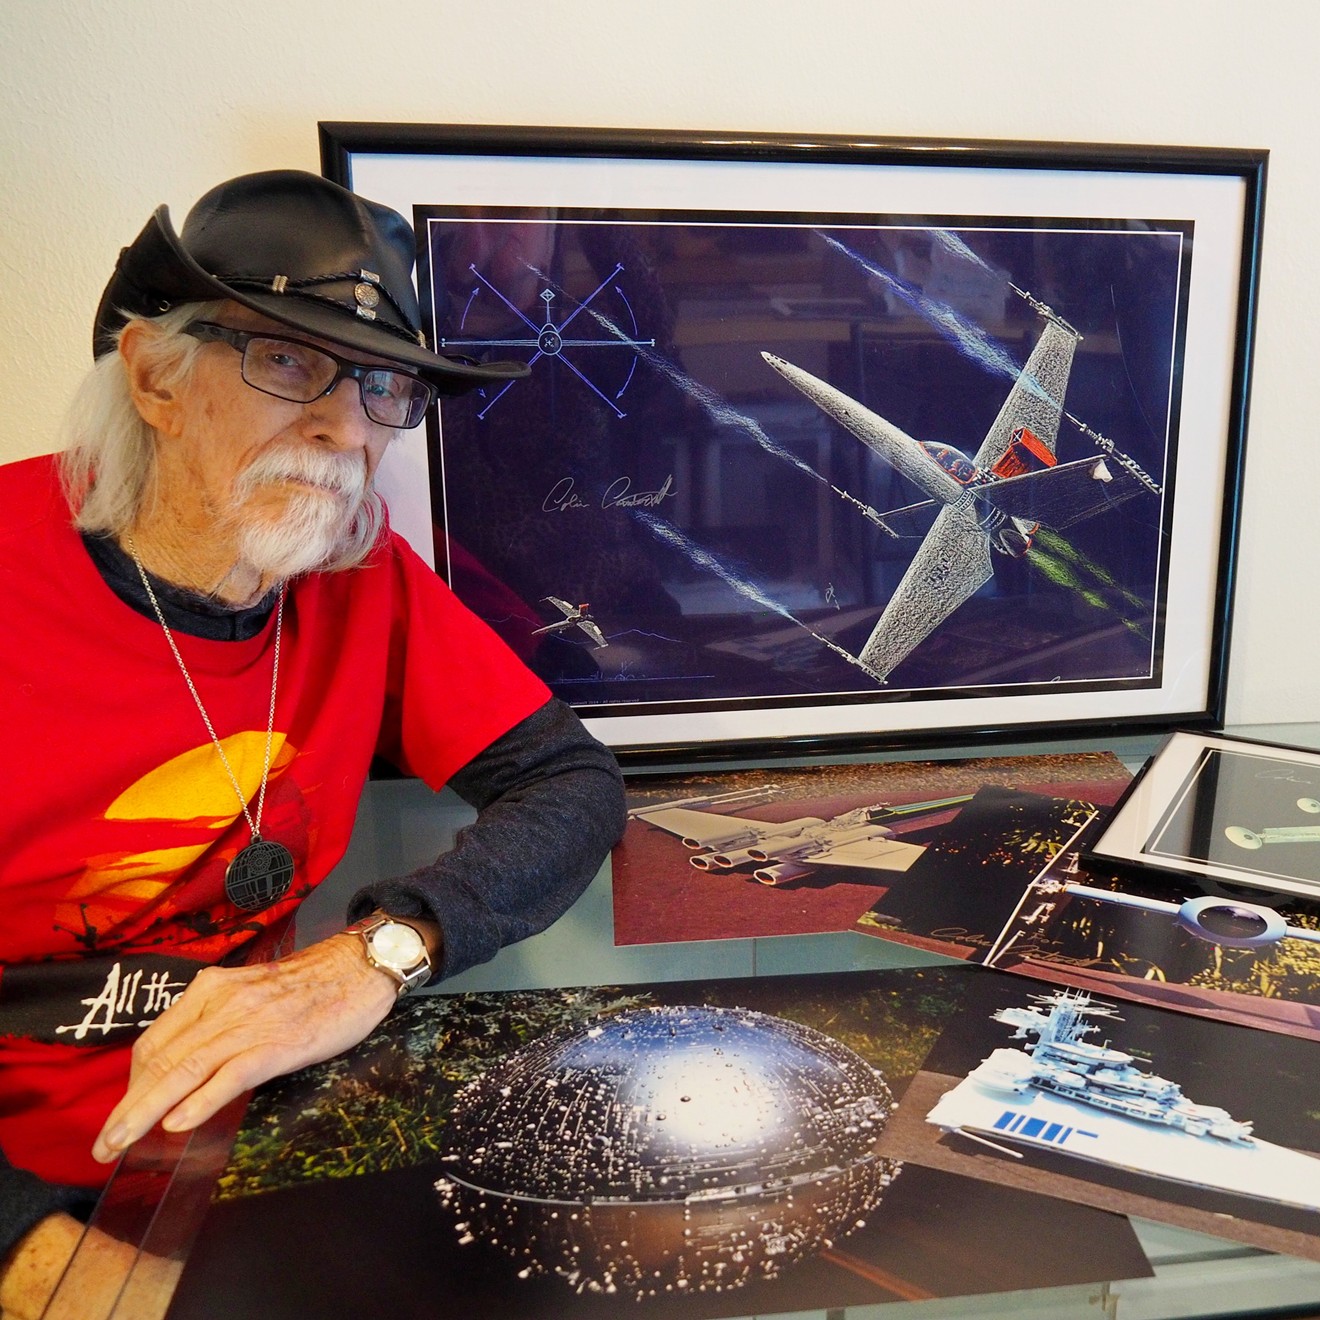 Star Wars ship designer Colin Cantwell is the special guest at Vision Comics and Oddities on Saturday, May 4.